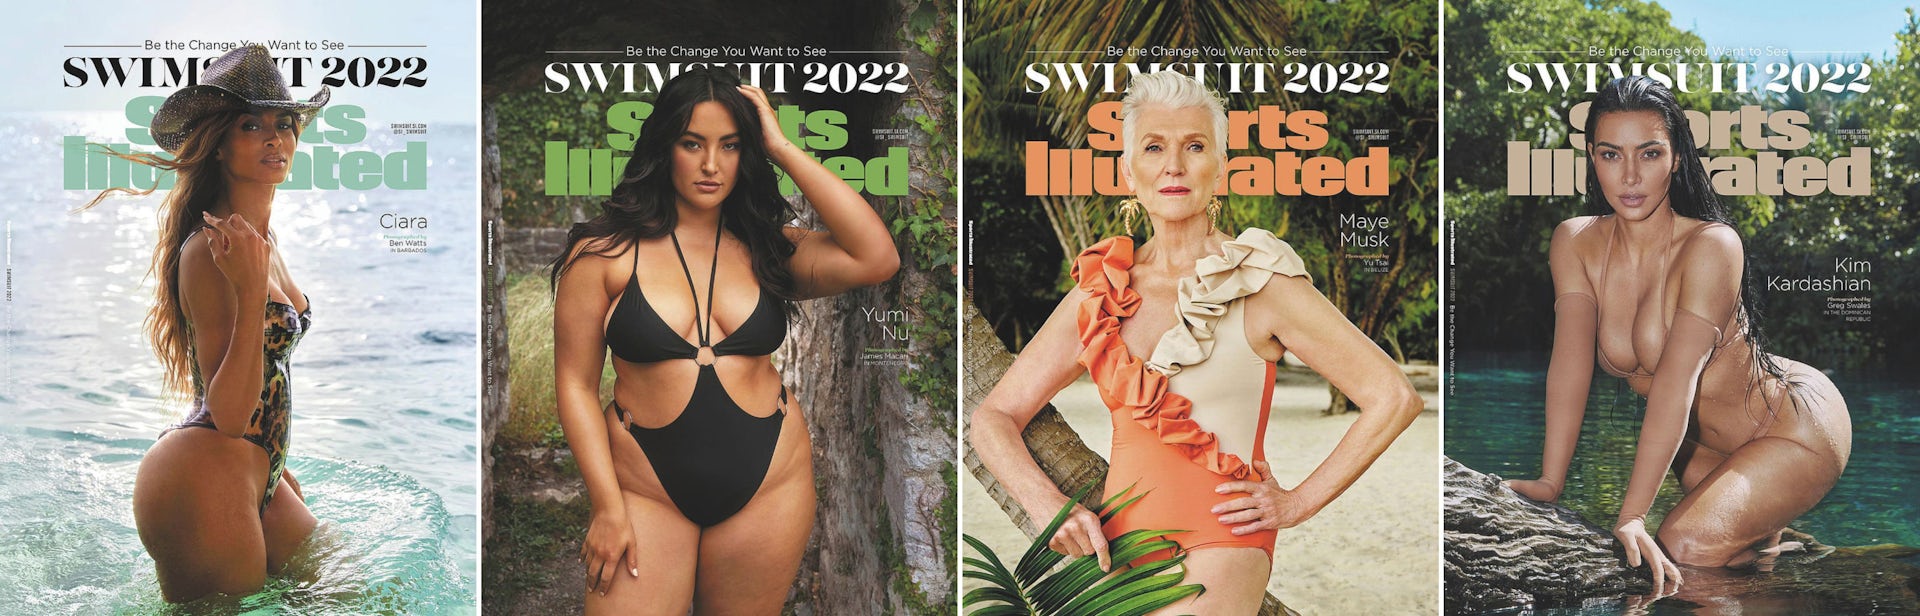 Sports Illustrated Swimsuit Is inclusive objectification something to celebrate?